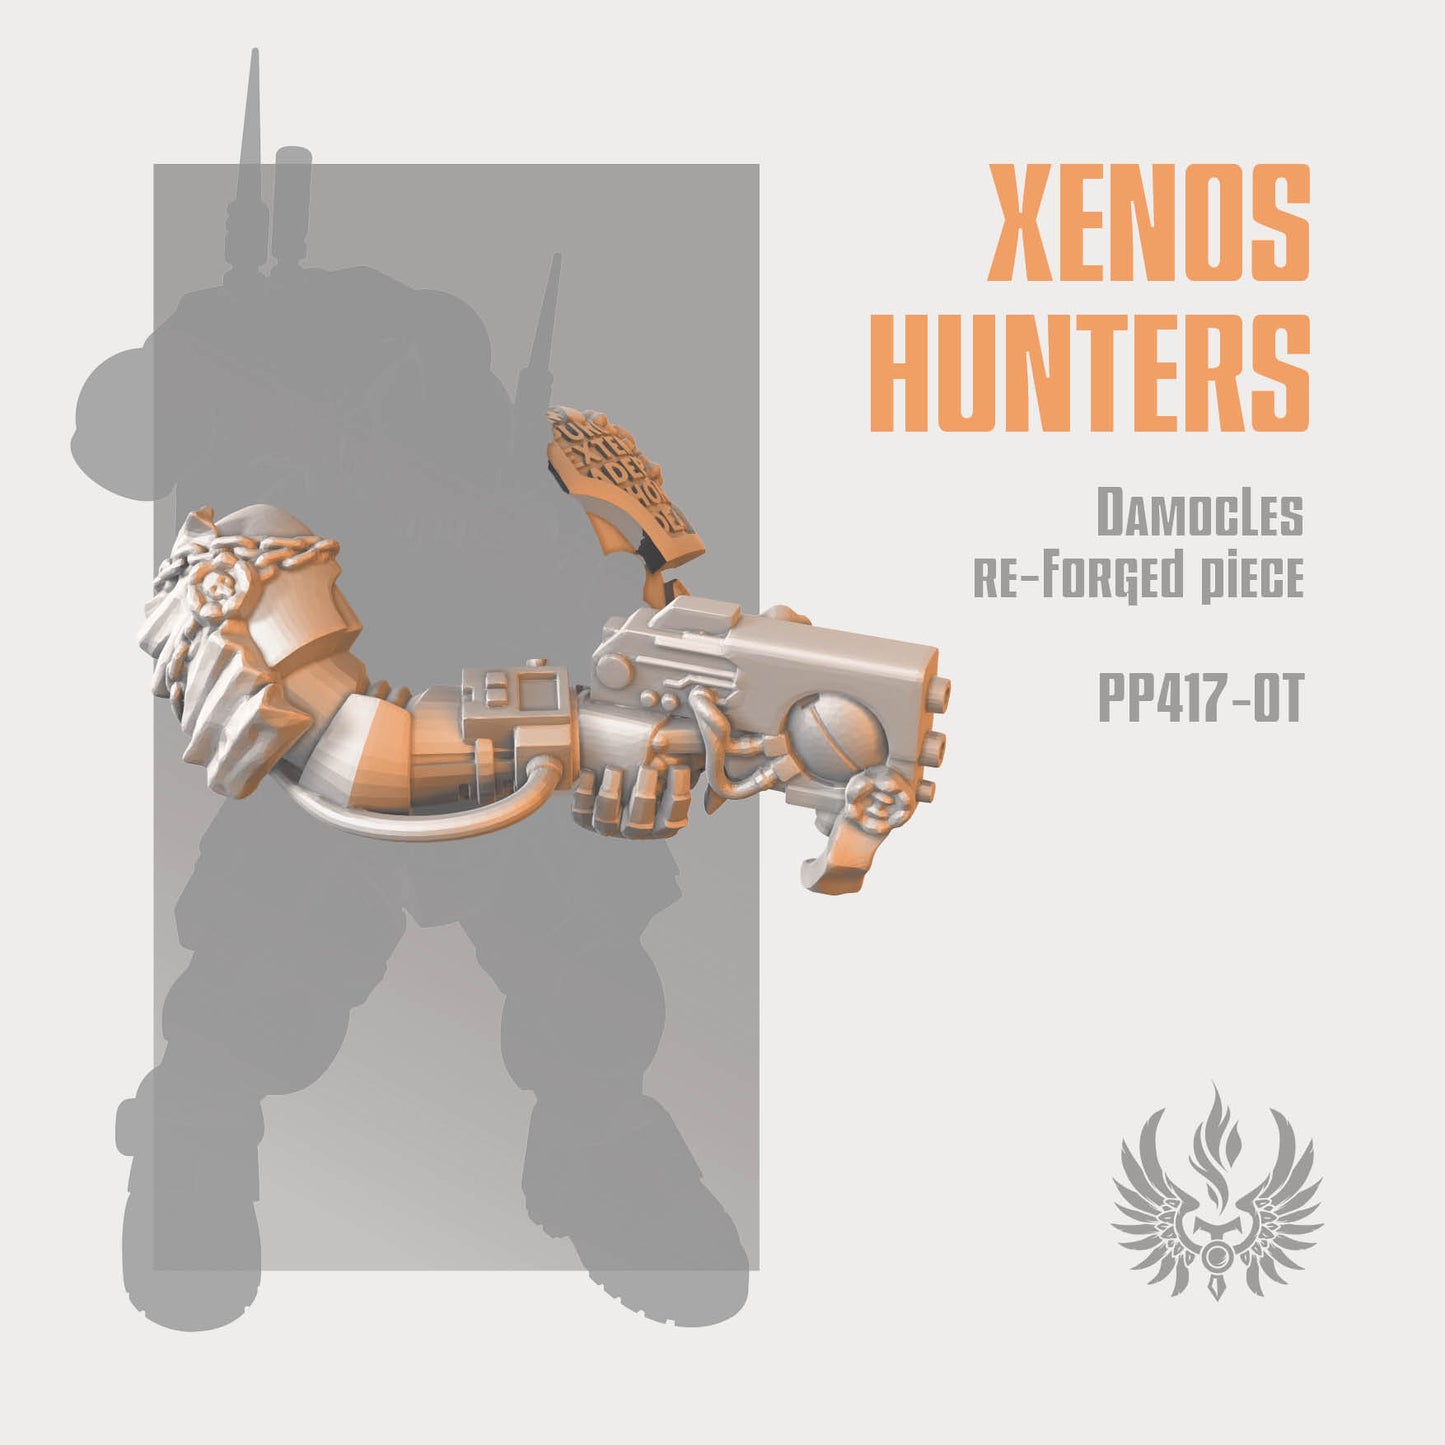 Xenos Hunters Reiver Re-forged Piece